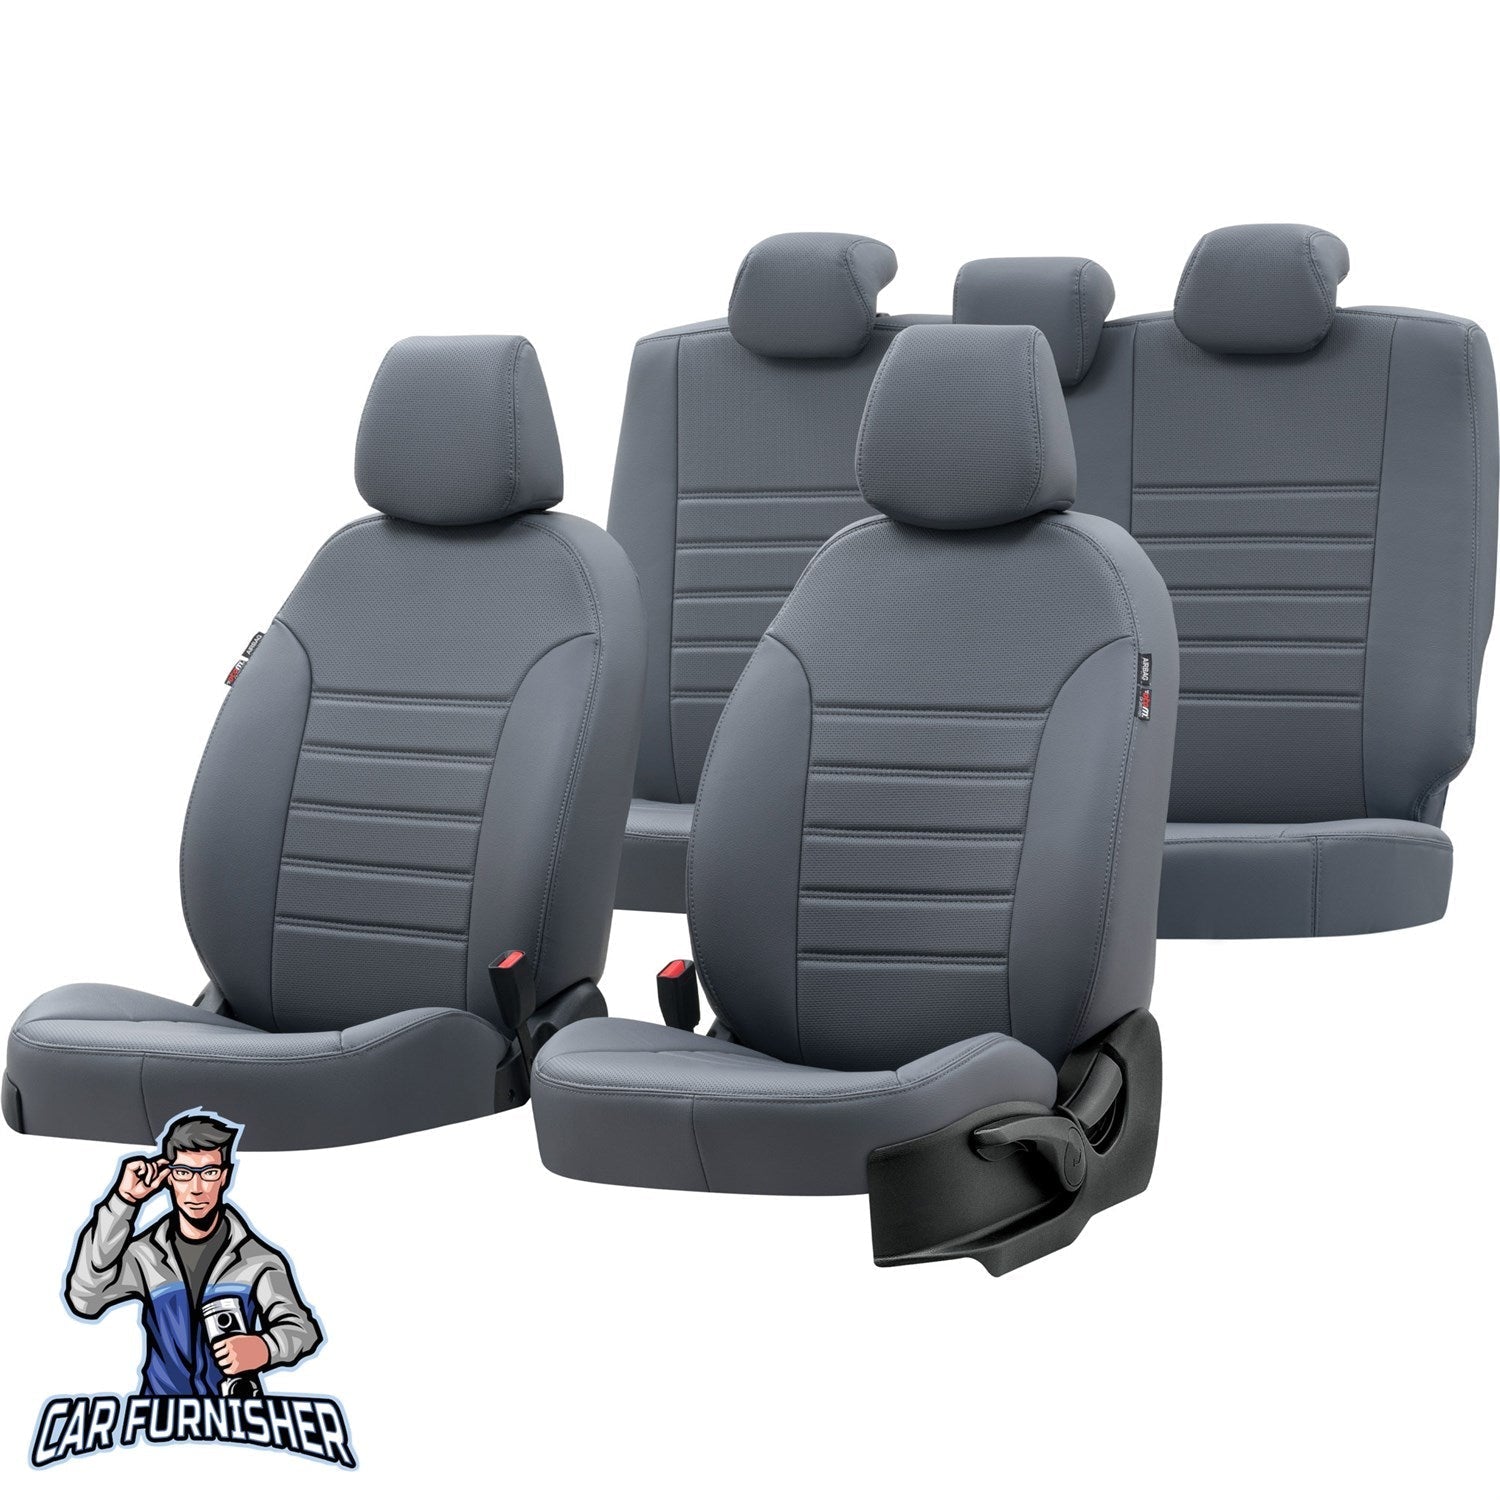 Dfm Succe Seat Covers New York Leather Design Smoked Leather